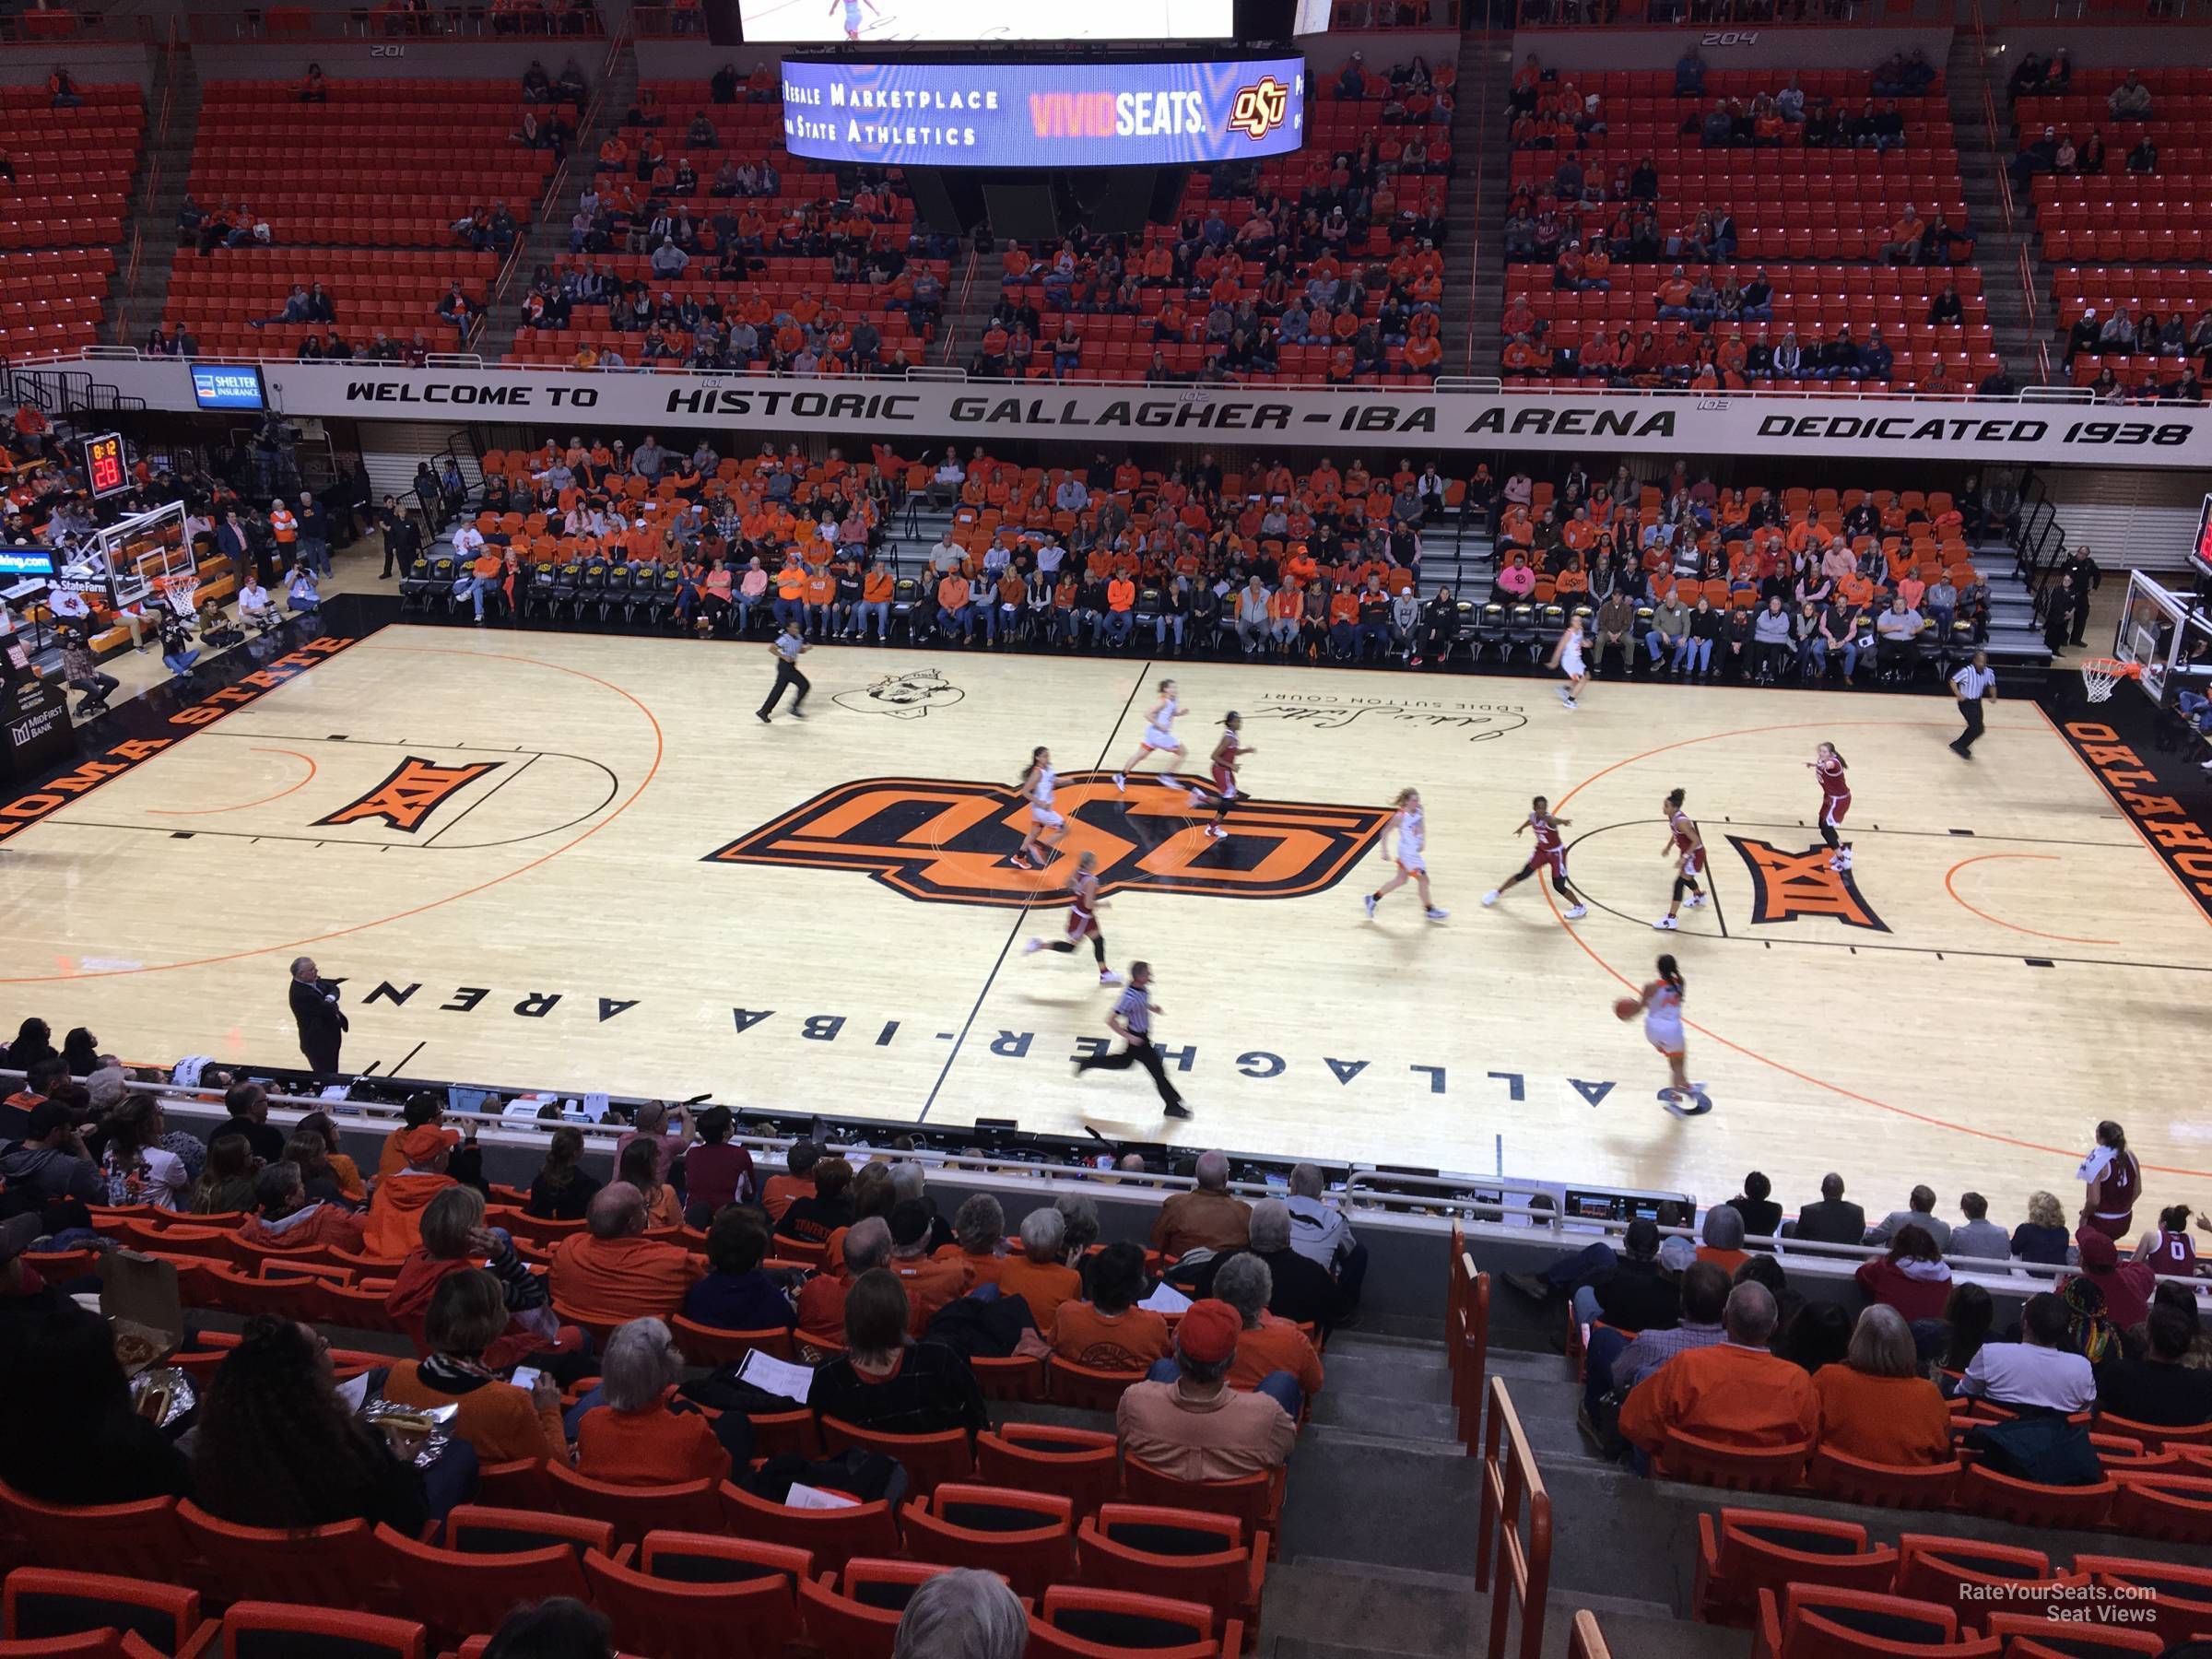 section 213, row 13 seat view  - gallagher-iba arena